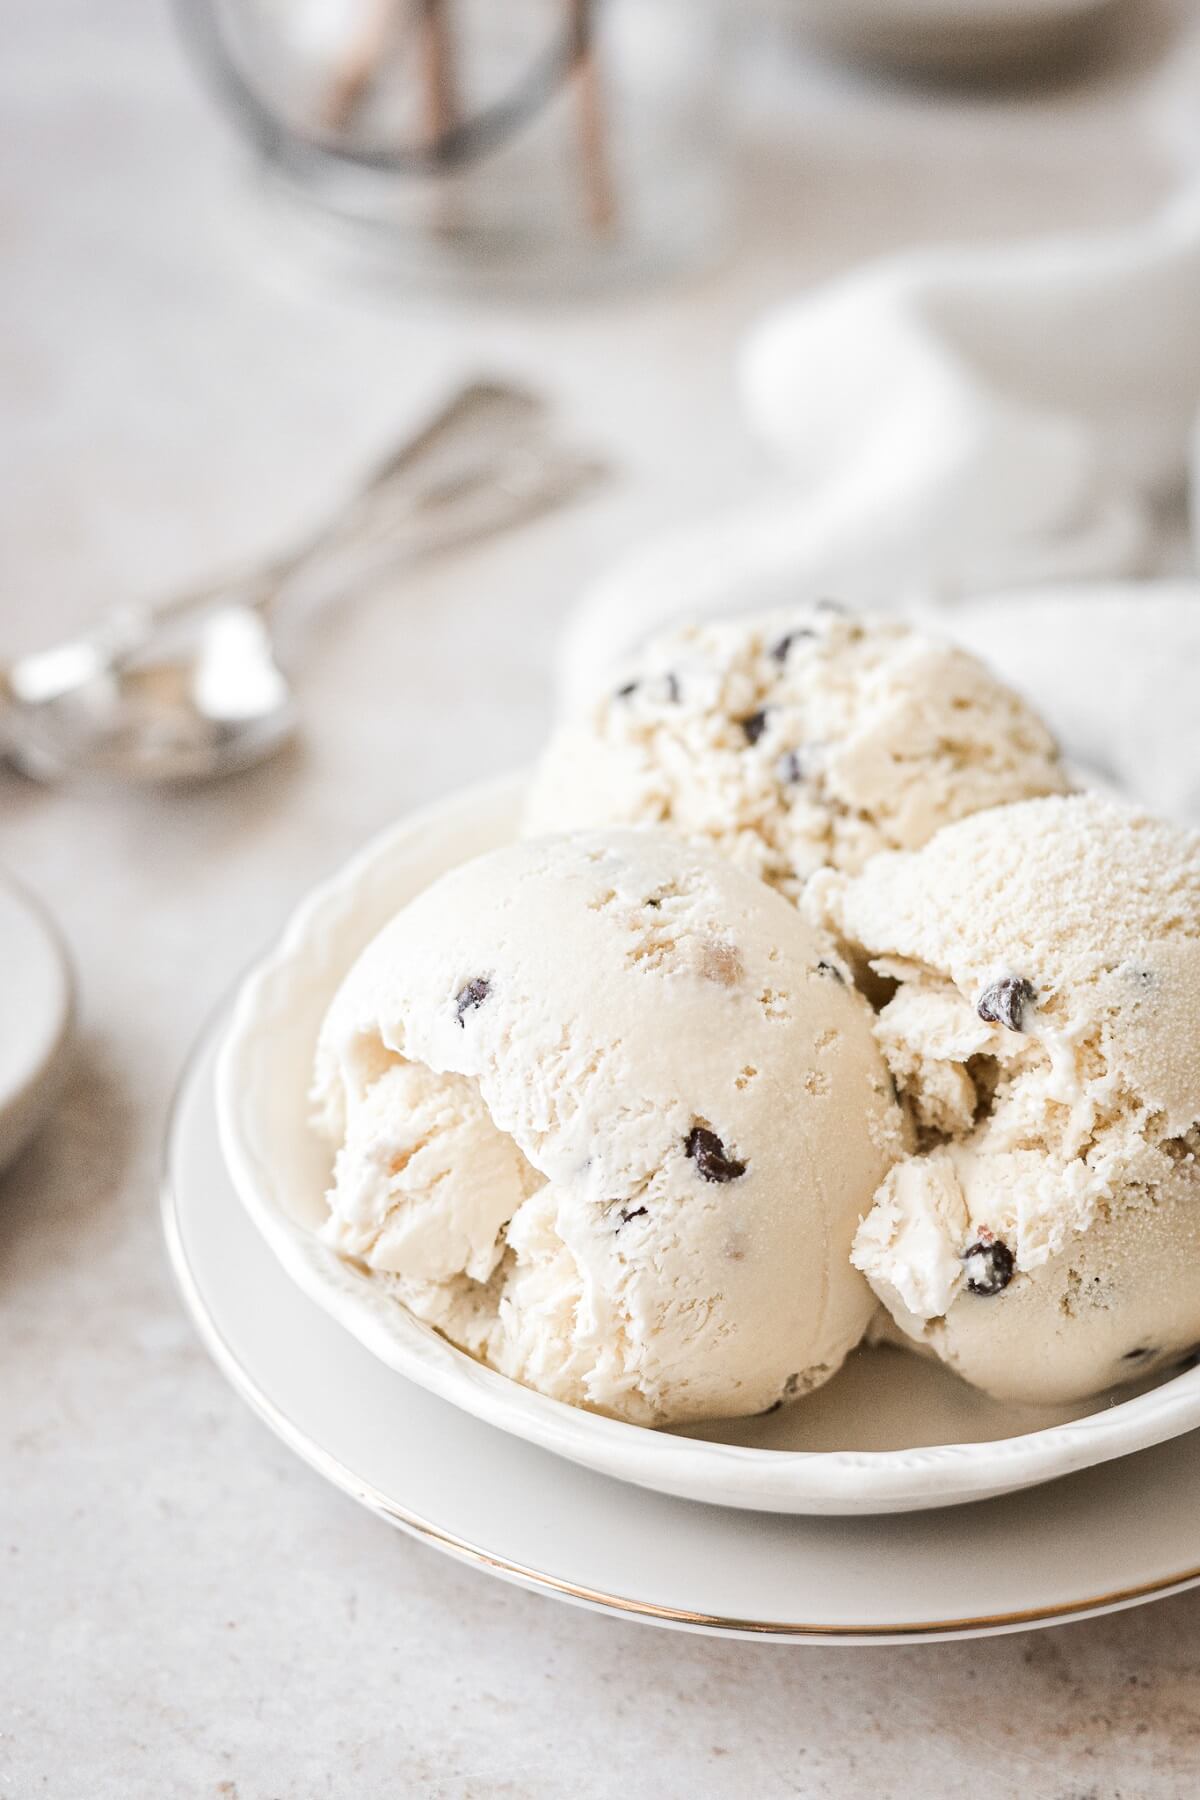 Scoops of chocolate chip cookie dough ice cream.